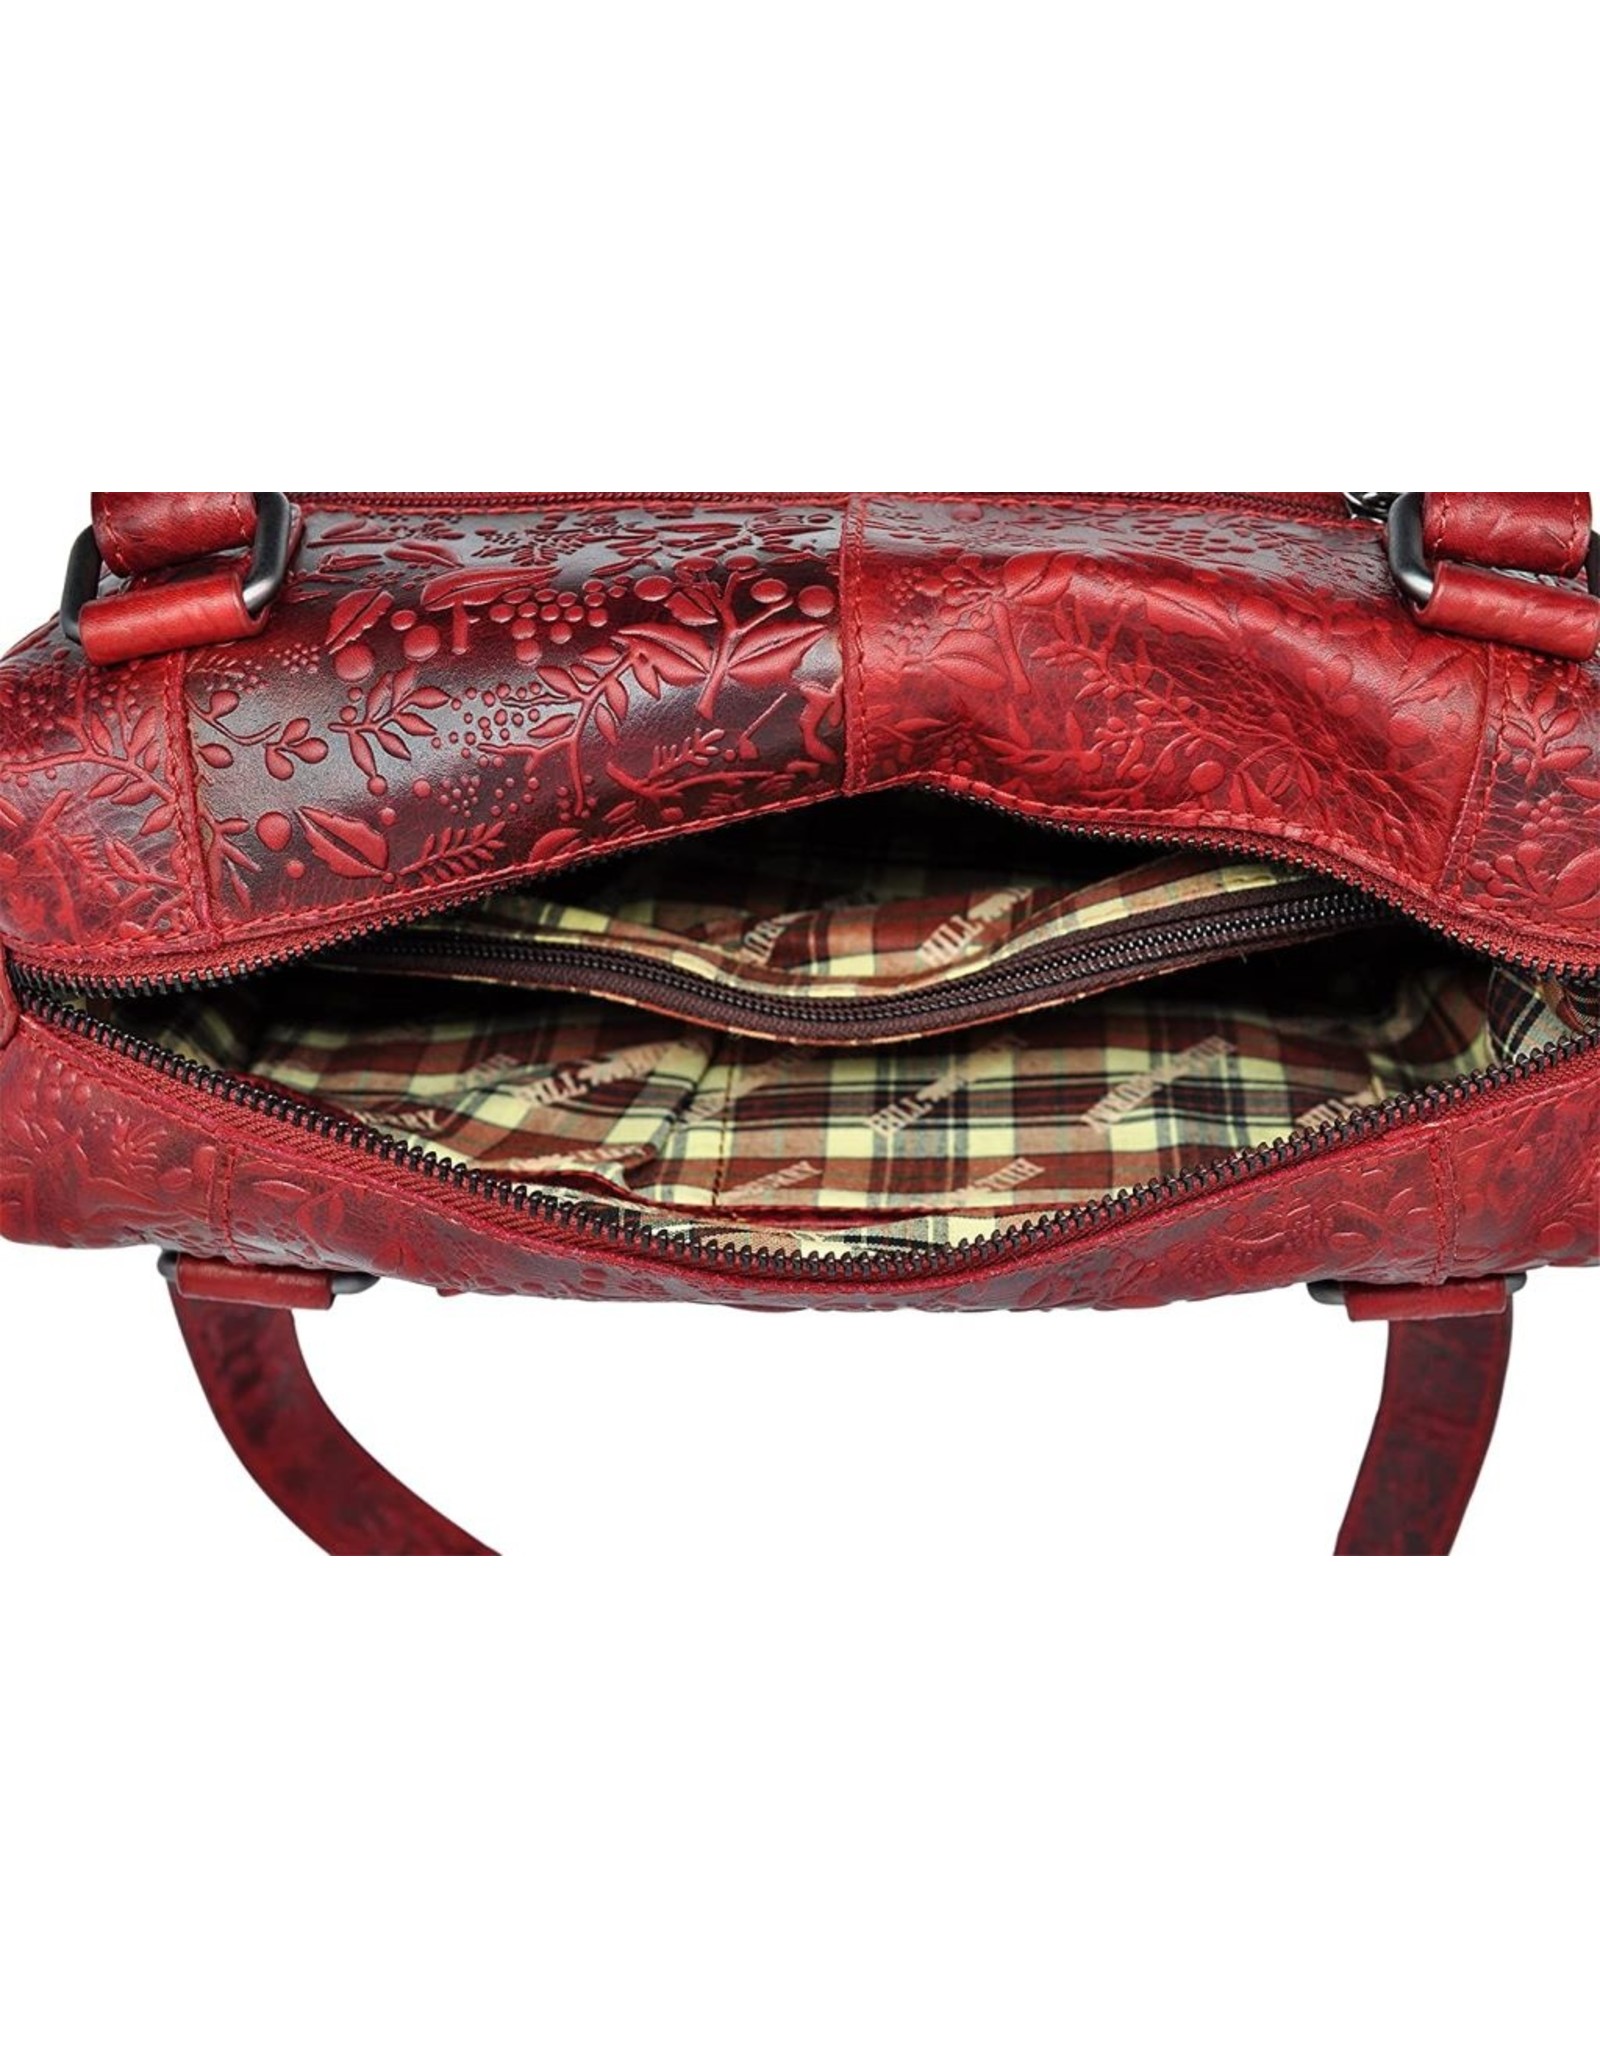 HillBurry Leather Shoulder bags  leather crossbody bags - HillBurry Shoulder Bag with Embossed Floral Print Red